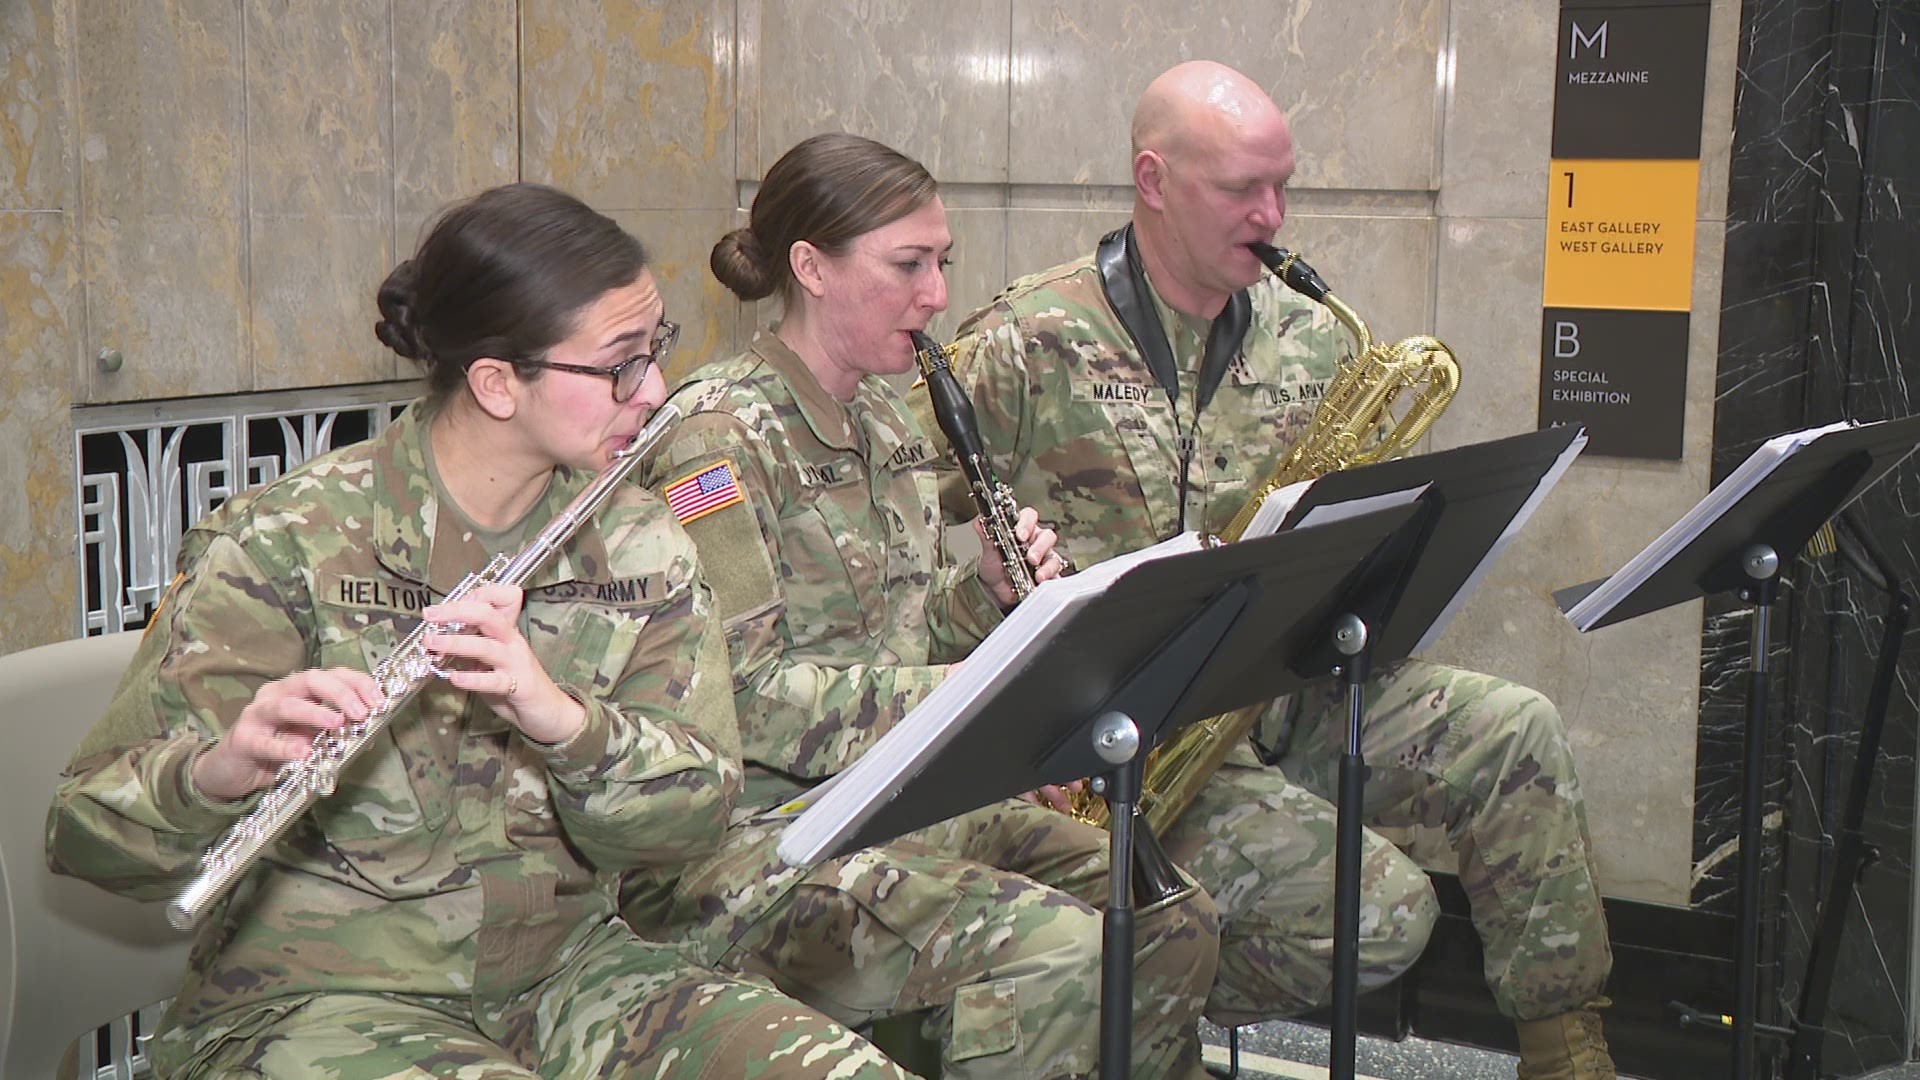 Windfall, the woodwind quintet from the 135th Army Band, performed Presidents Day concert